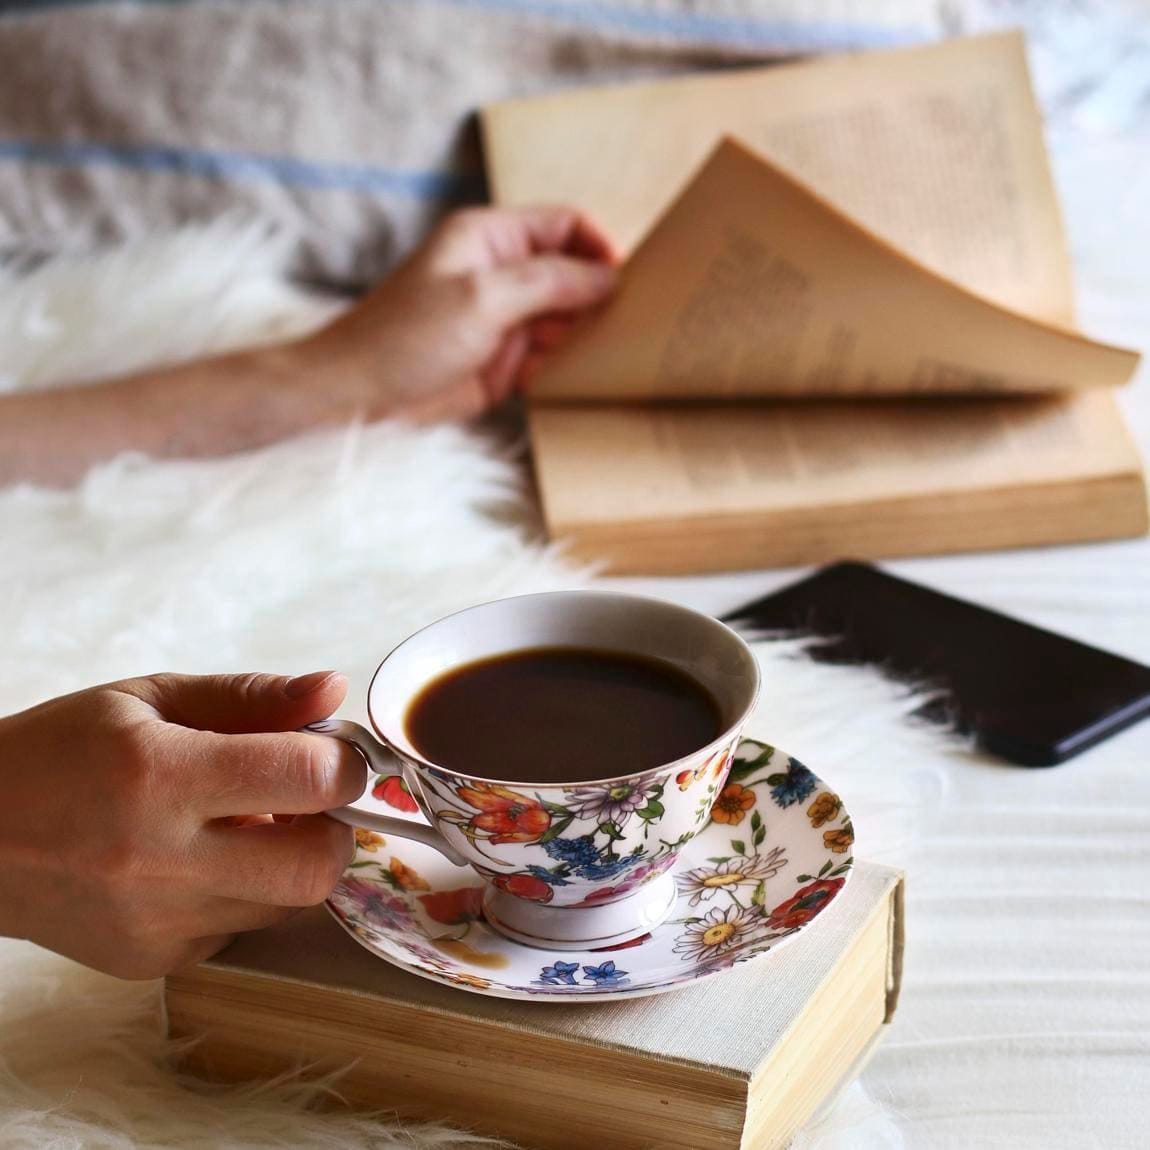 Female sitting on the bed, leafing through a book and drinking a cup of coffee